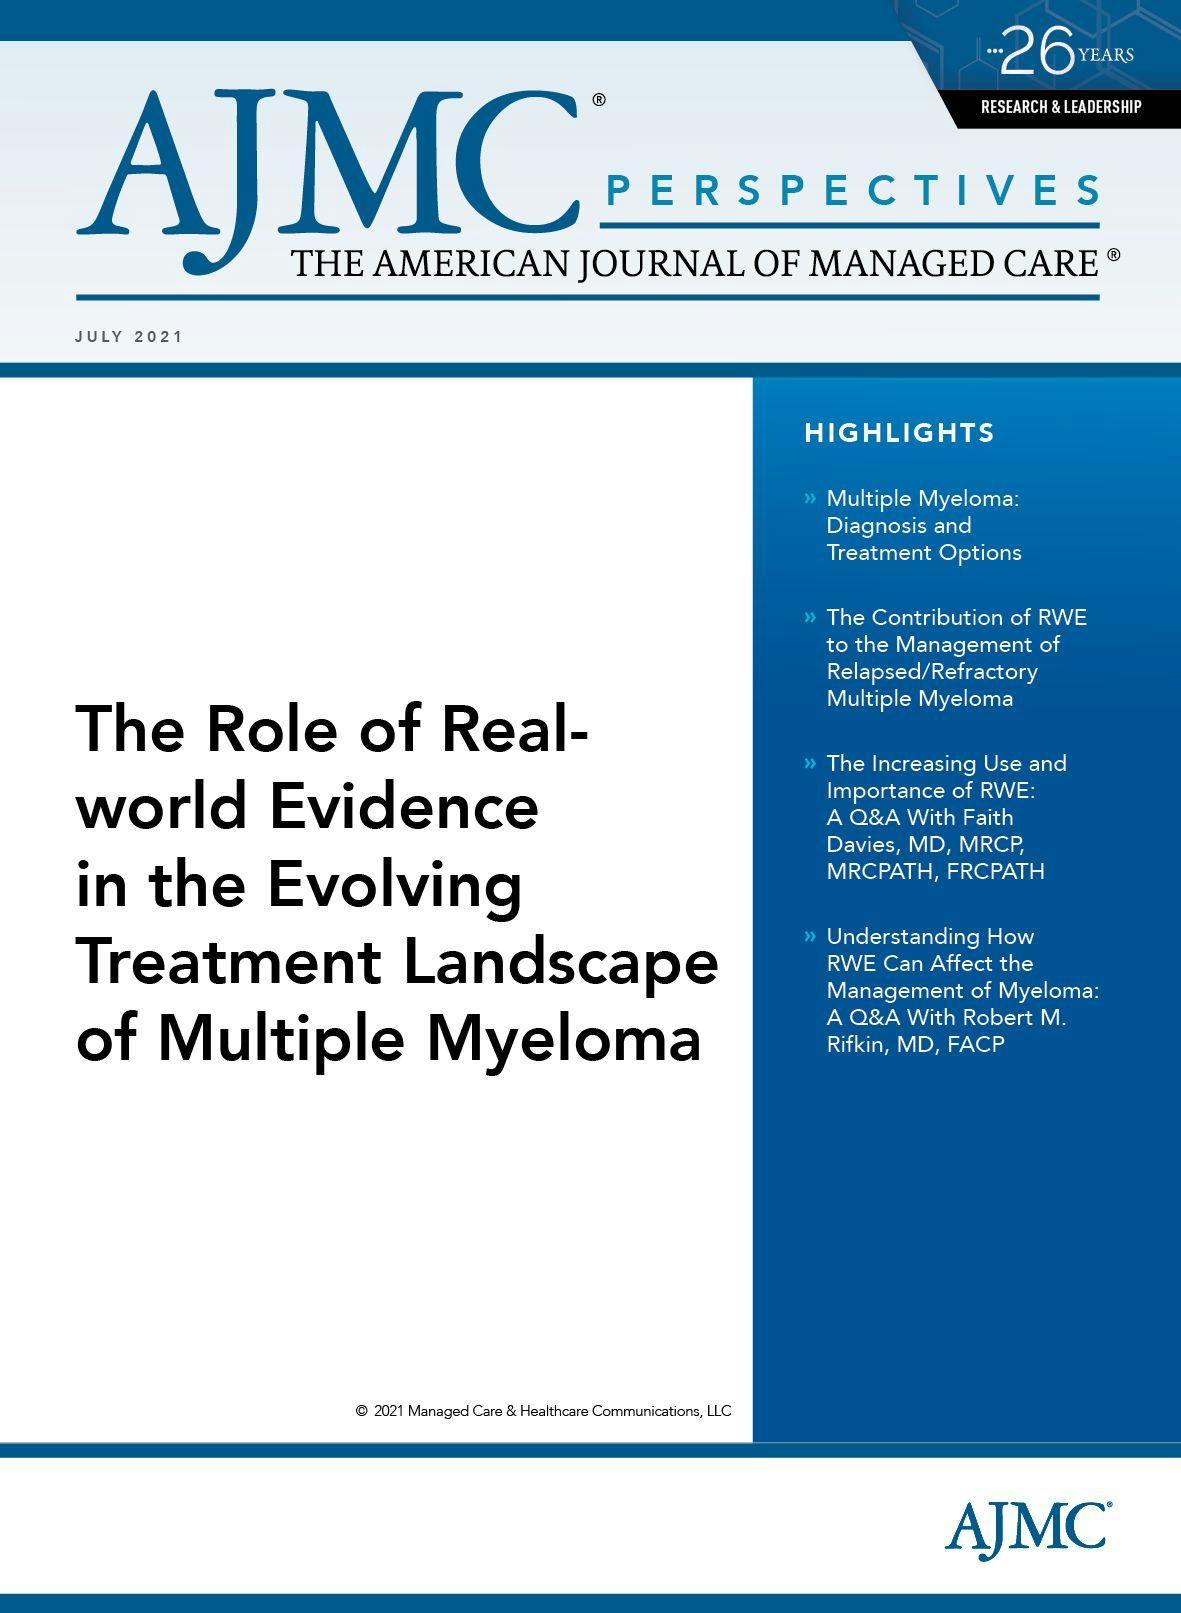 The Role of Real-world Evidence in the Evolving Treatment Landscape of Multiple Myeloma 